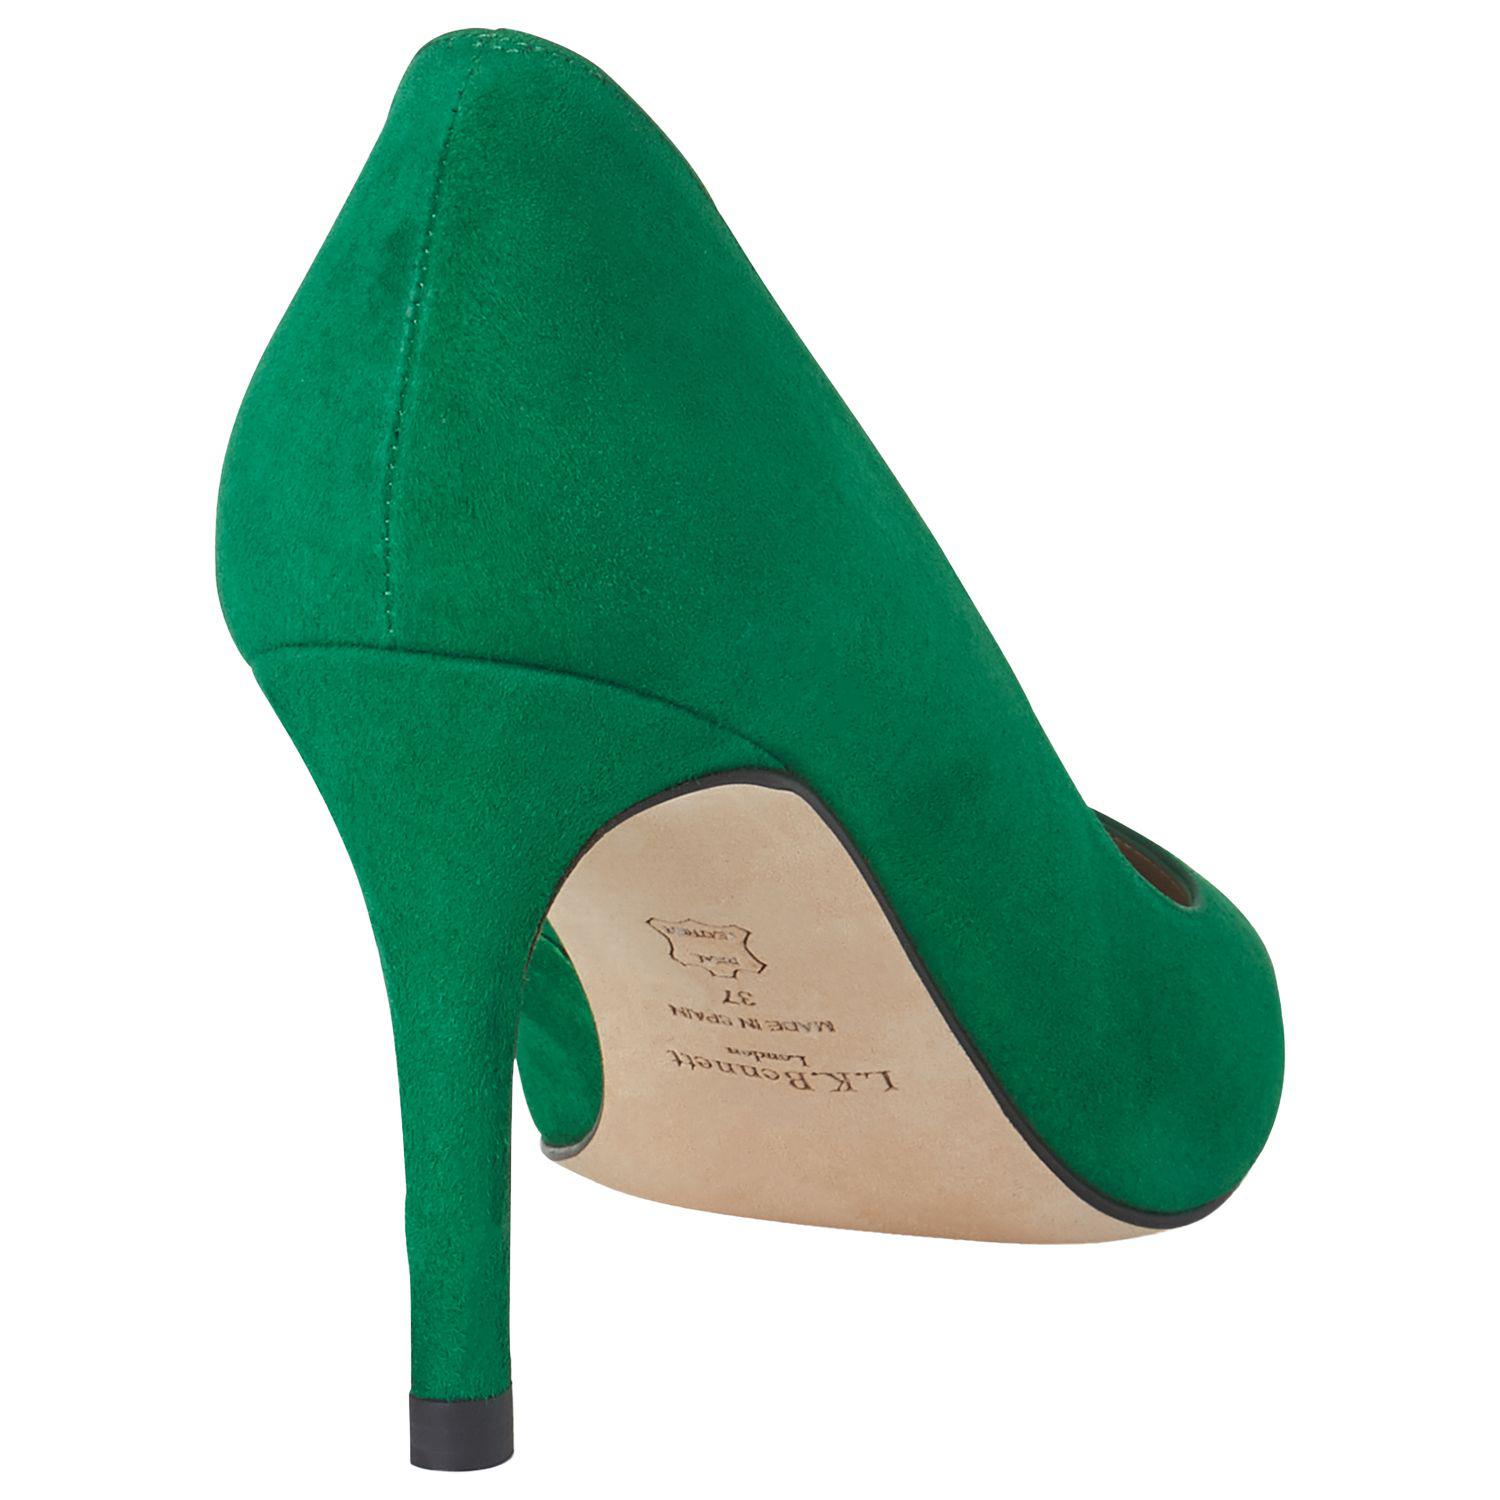 green suede court shoes